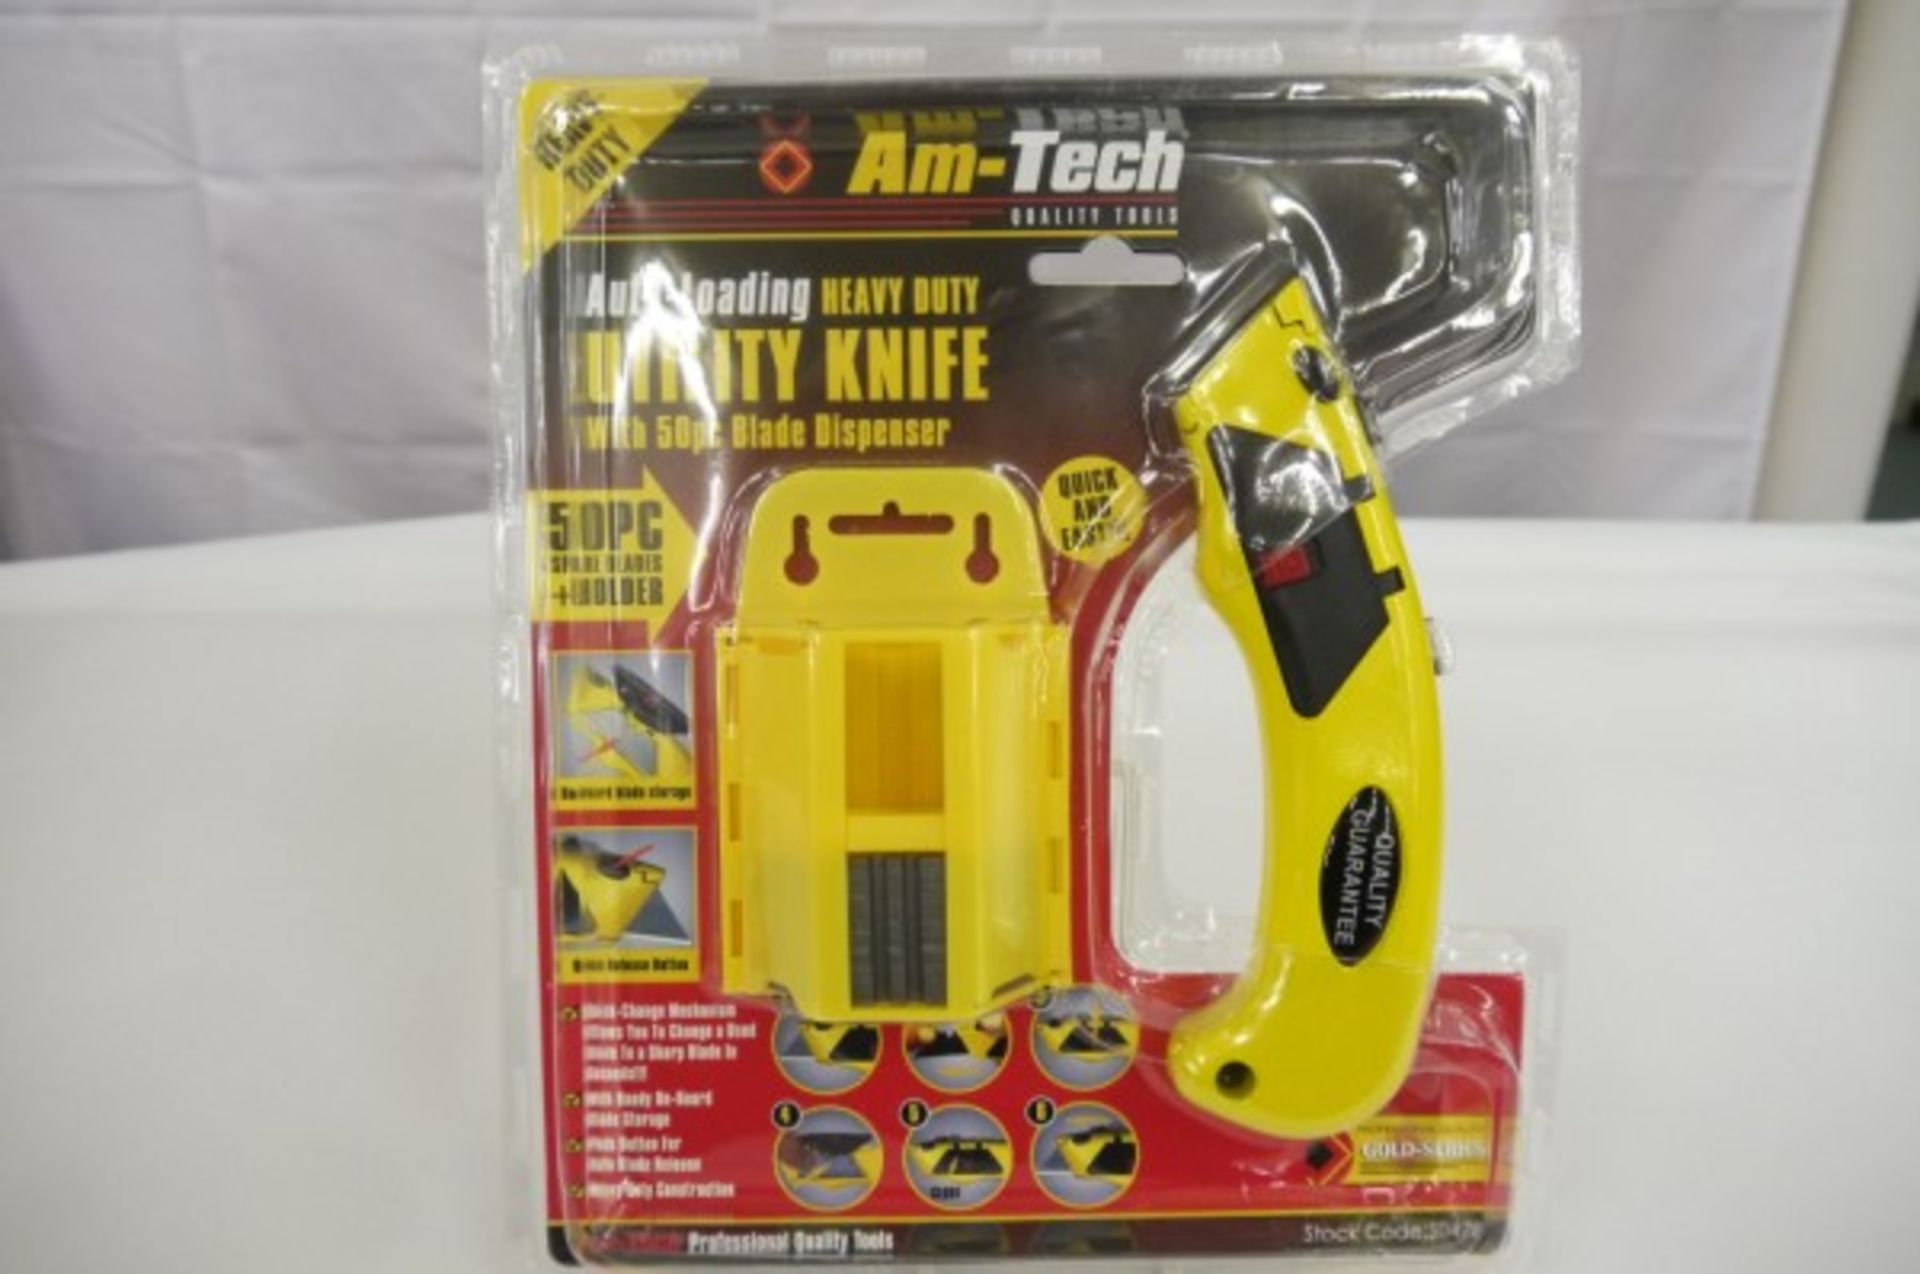 V Brand New Auto Loading Utility Knife With 50pce Blade Dispenser X 2 YOUR BID PRICE TO BE